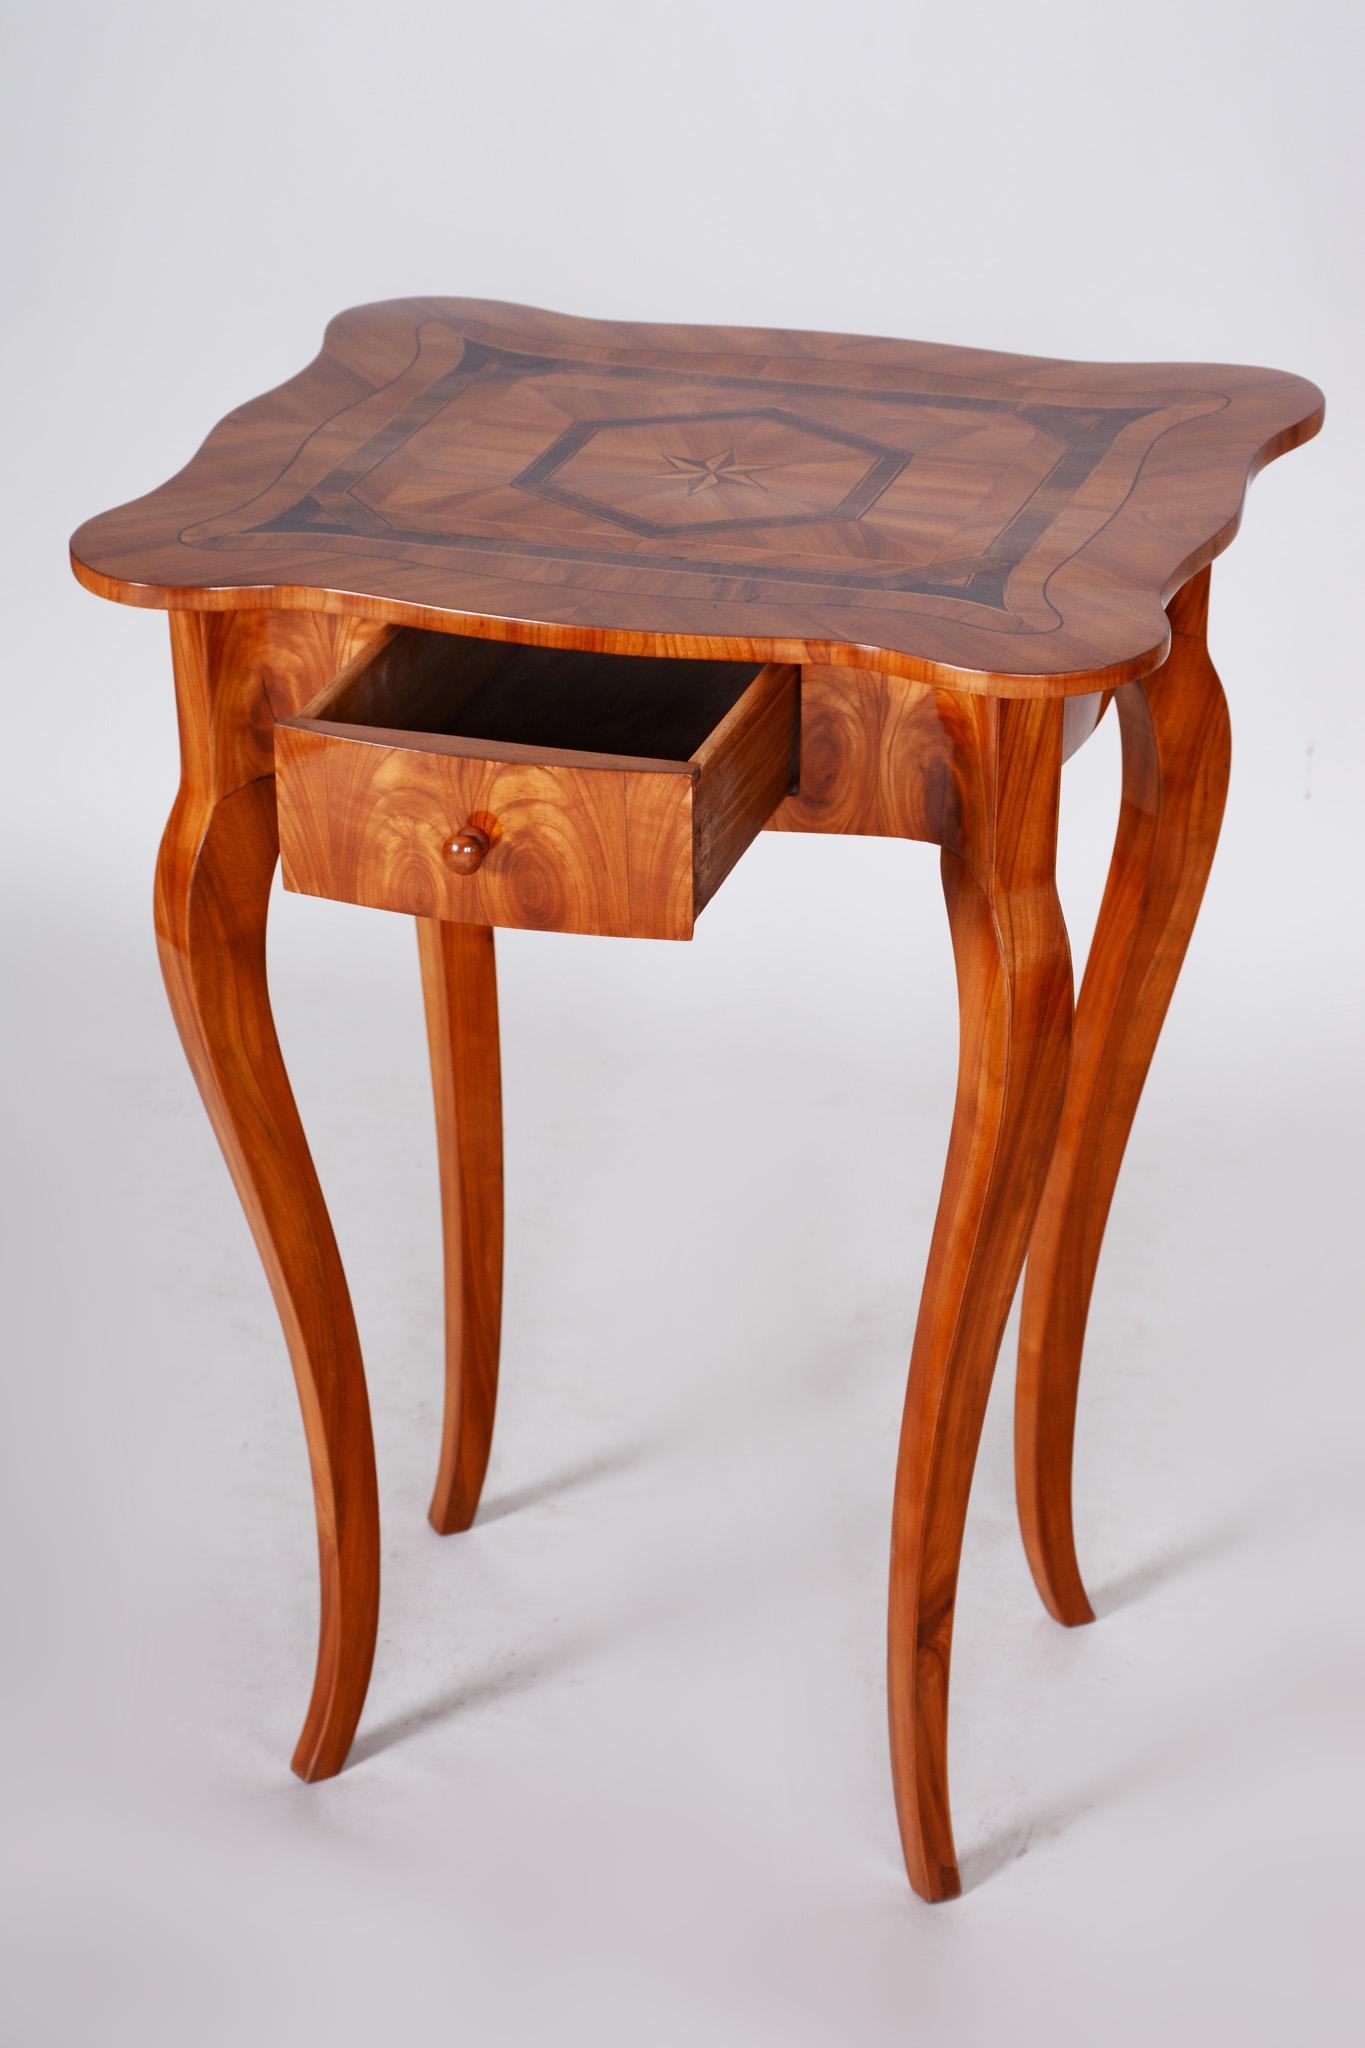 Small Cherry Classicism inlaid Table, Czechia, 1780-1789, Shellac Polished 1